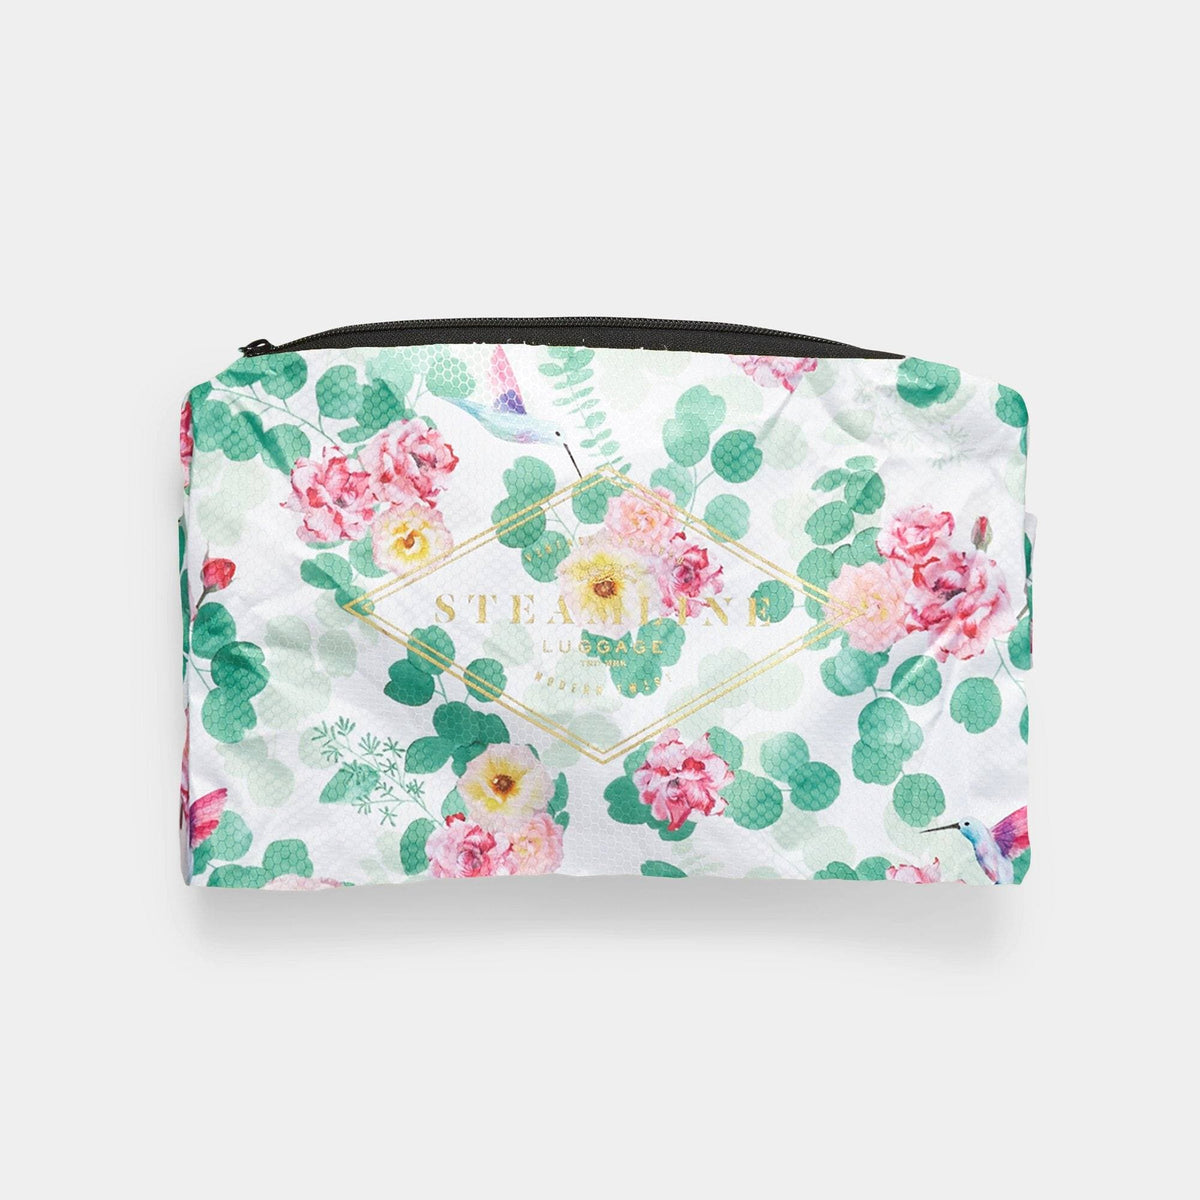 The Floral Protective Cover - Spinner Size Protective Cover Steamline Luggage 